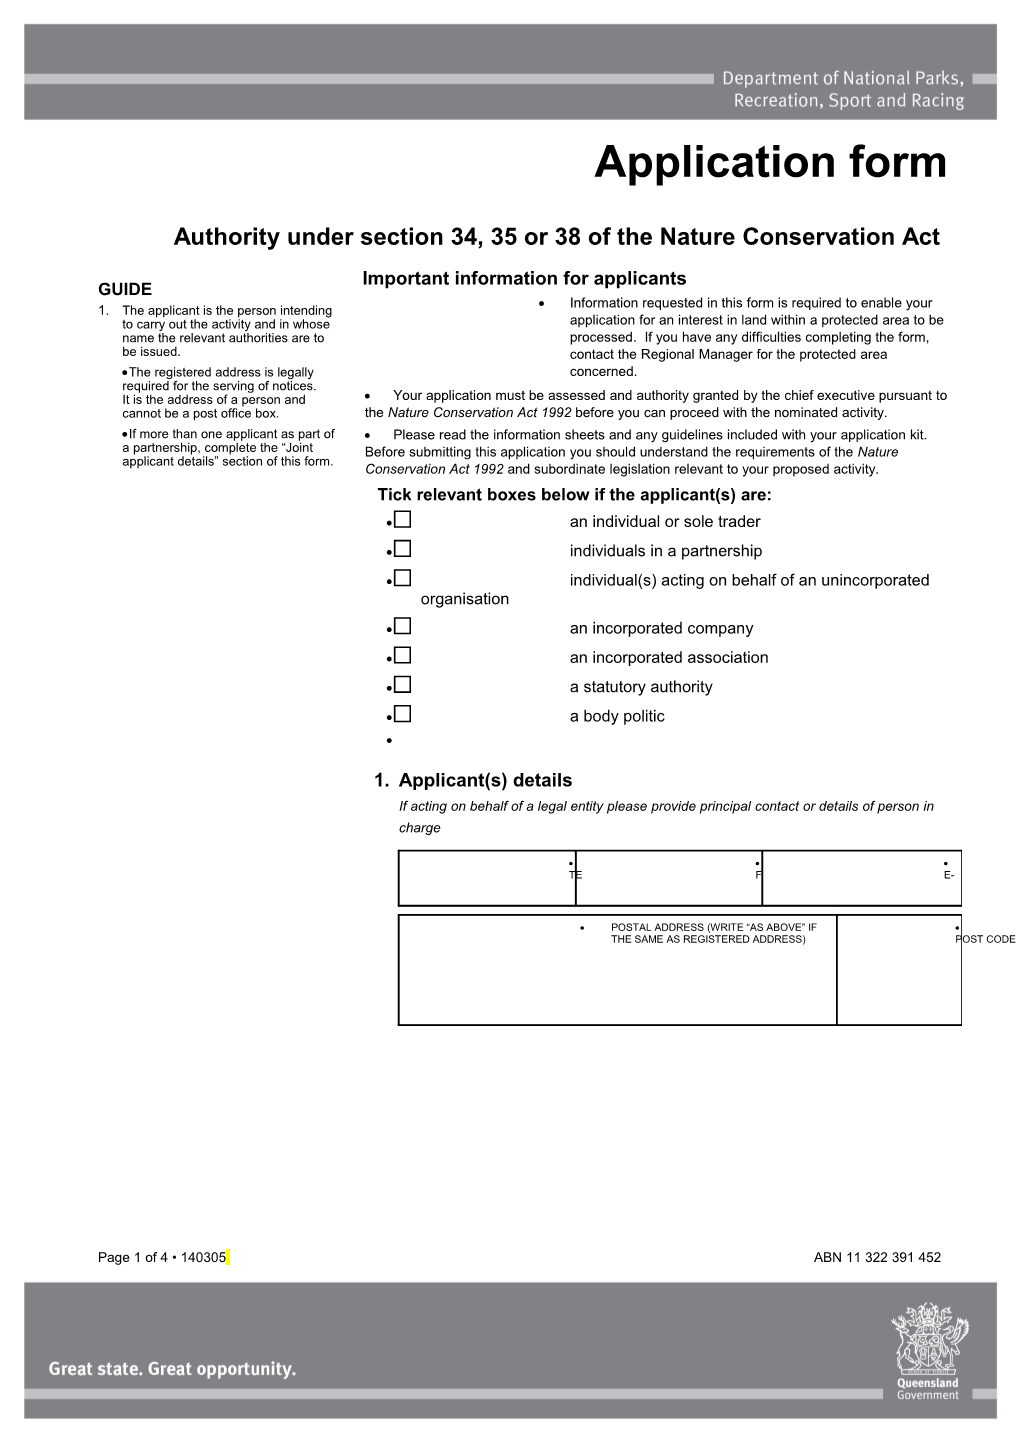 Authority Under Section 34, 35 Or 38 of the Nature Conservation Act